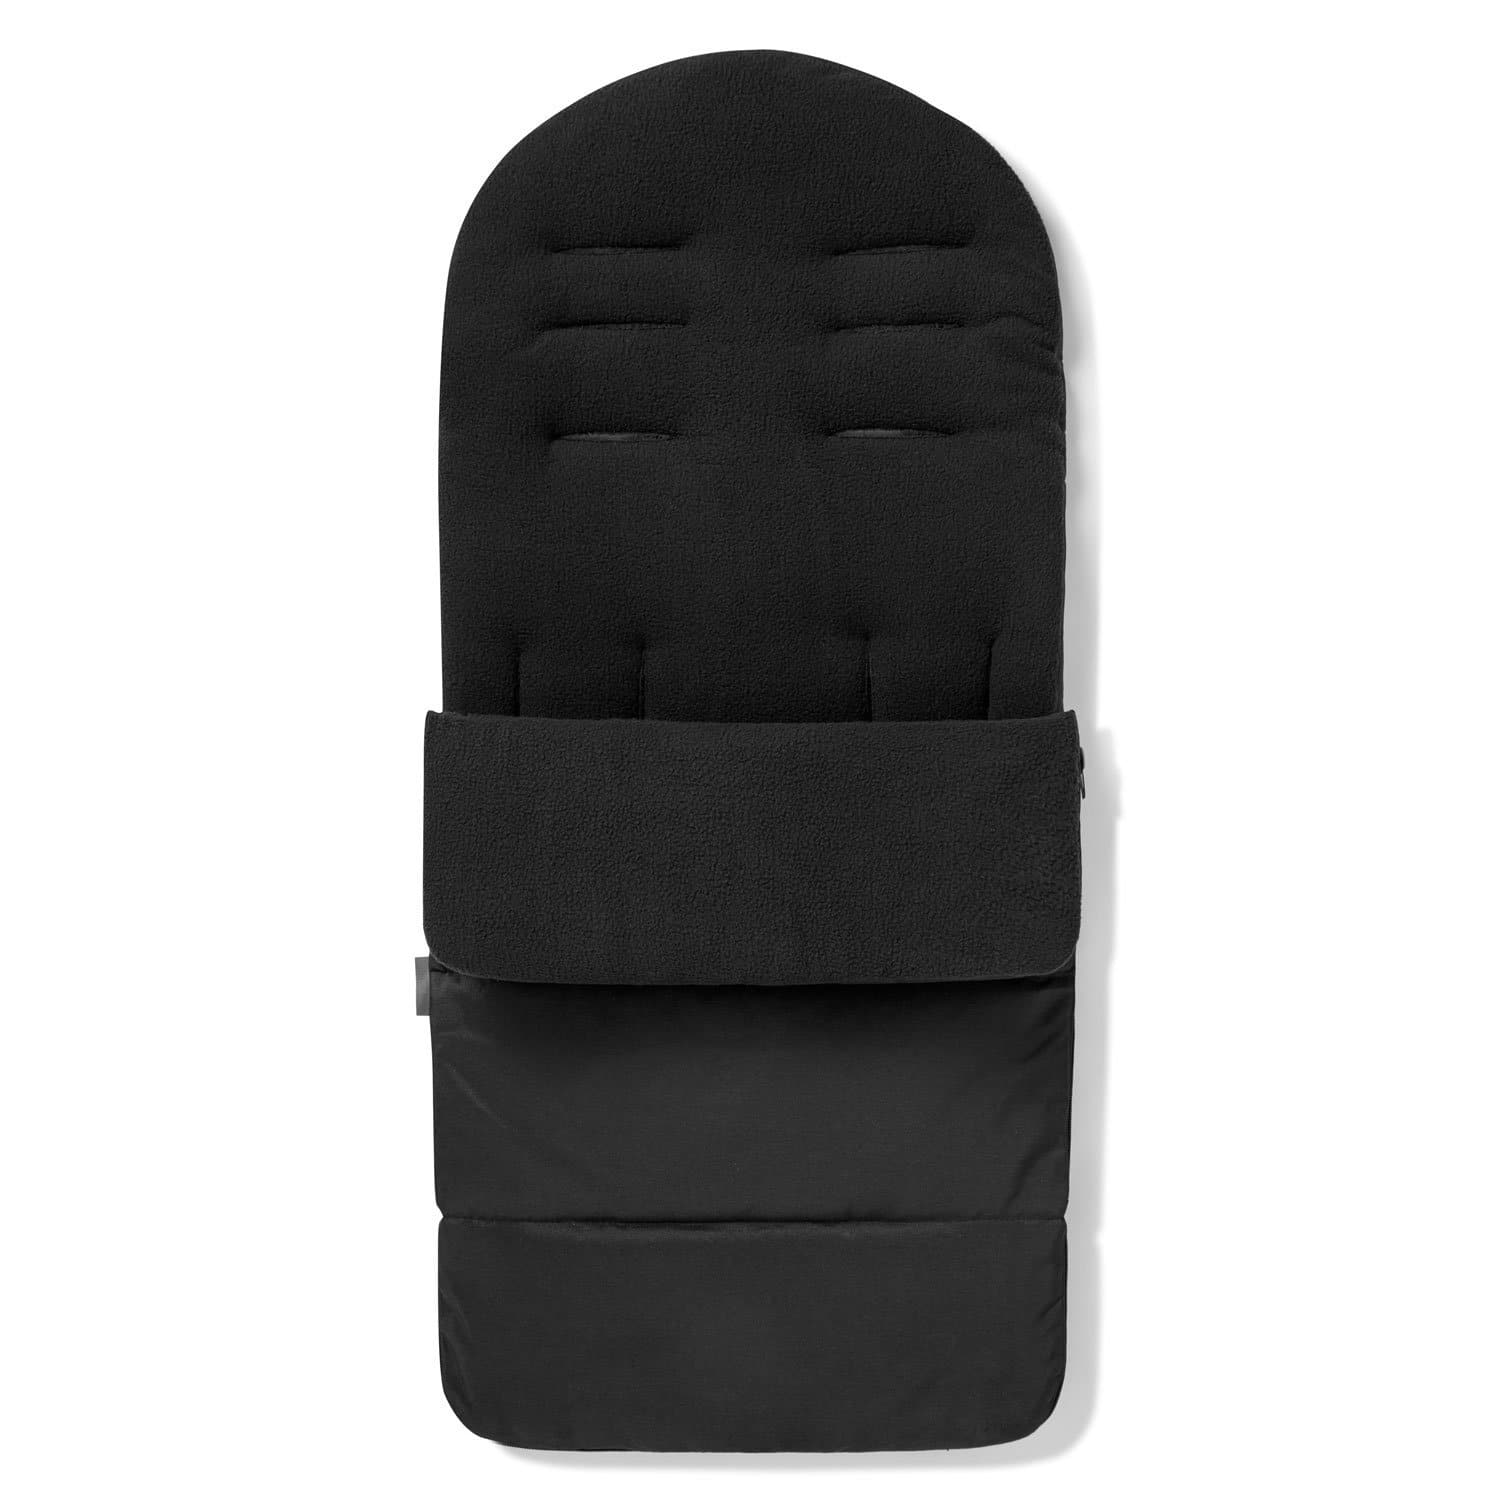 Premium Footmuff / Cosy Toes Compatible with Stokke - For Your Little One